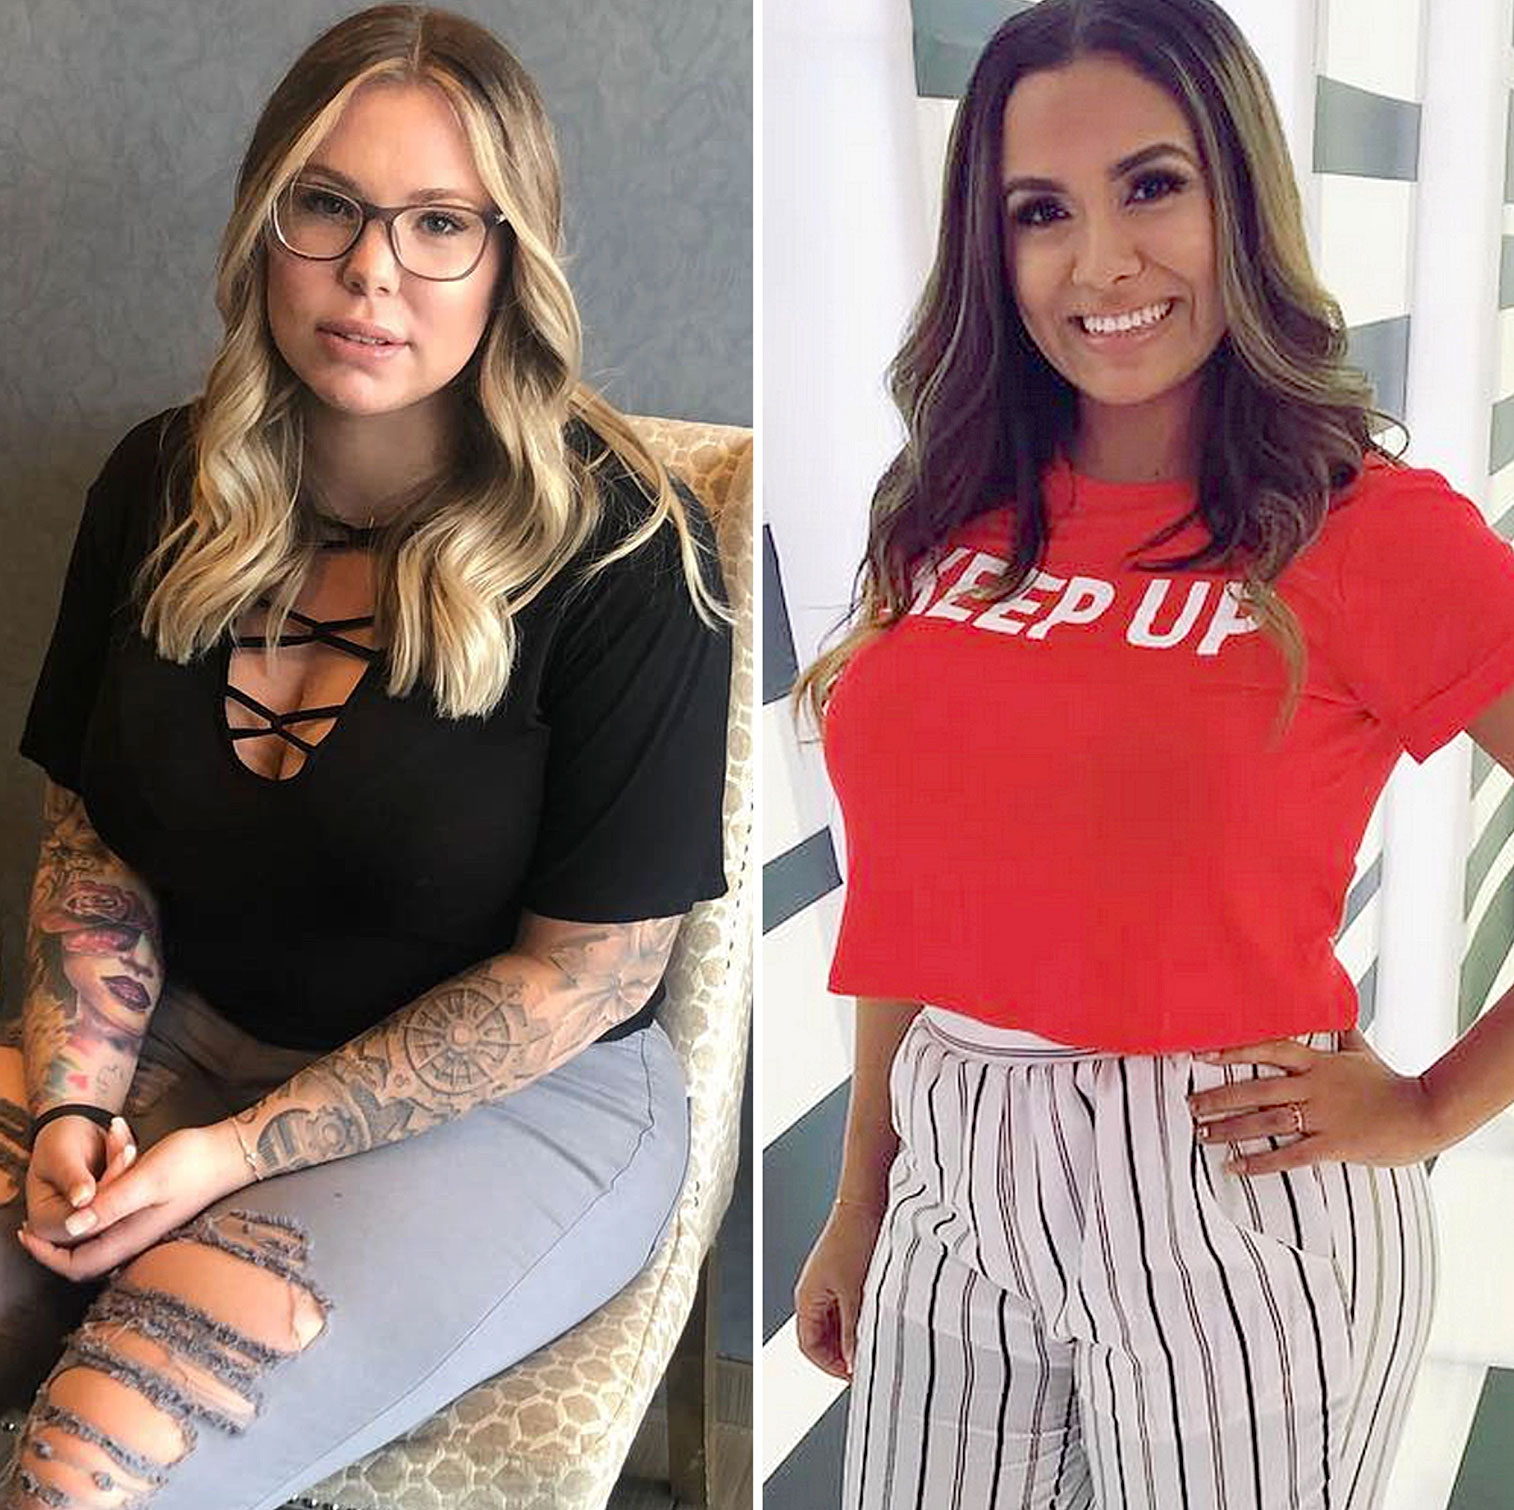 Kailyn Lowry and Briana DeJesus Feud